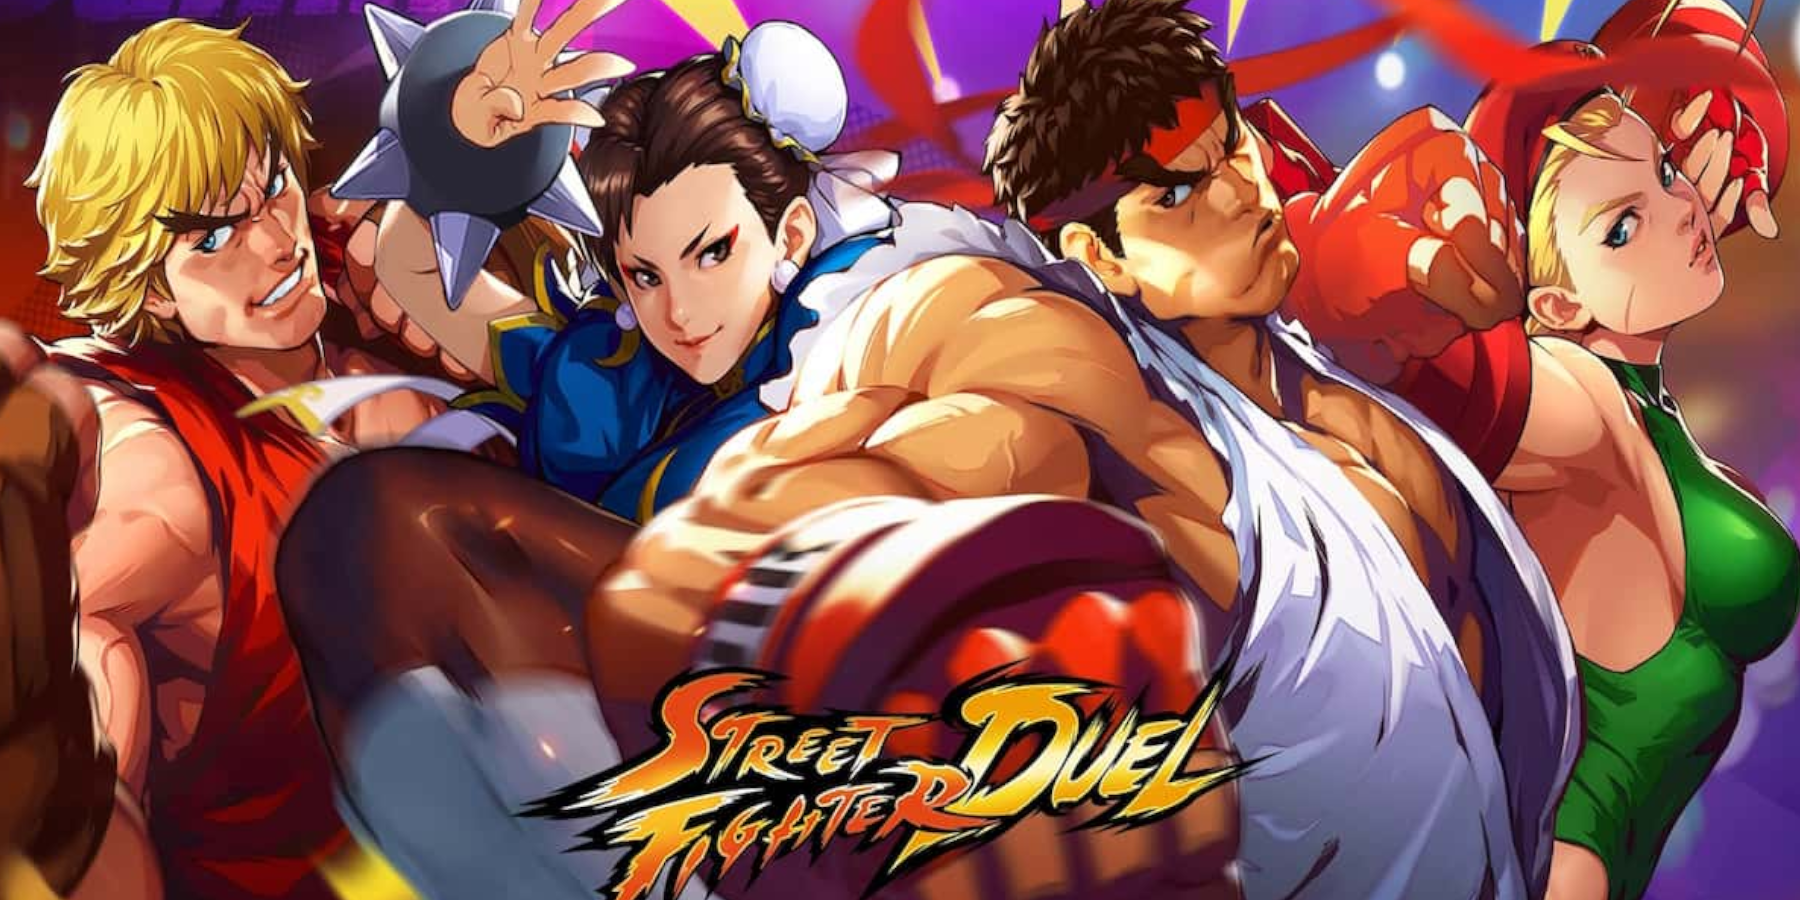 Street Fighter Duel - Mobile game based on classic fighting IP